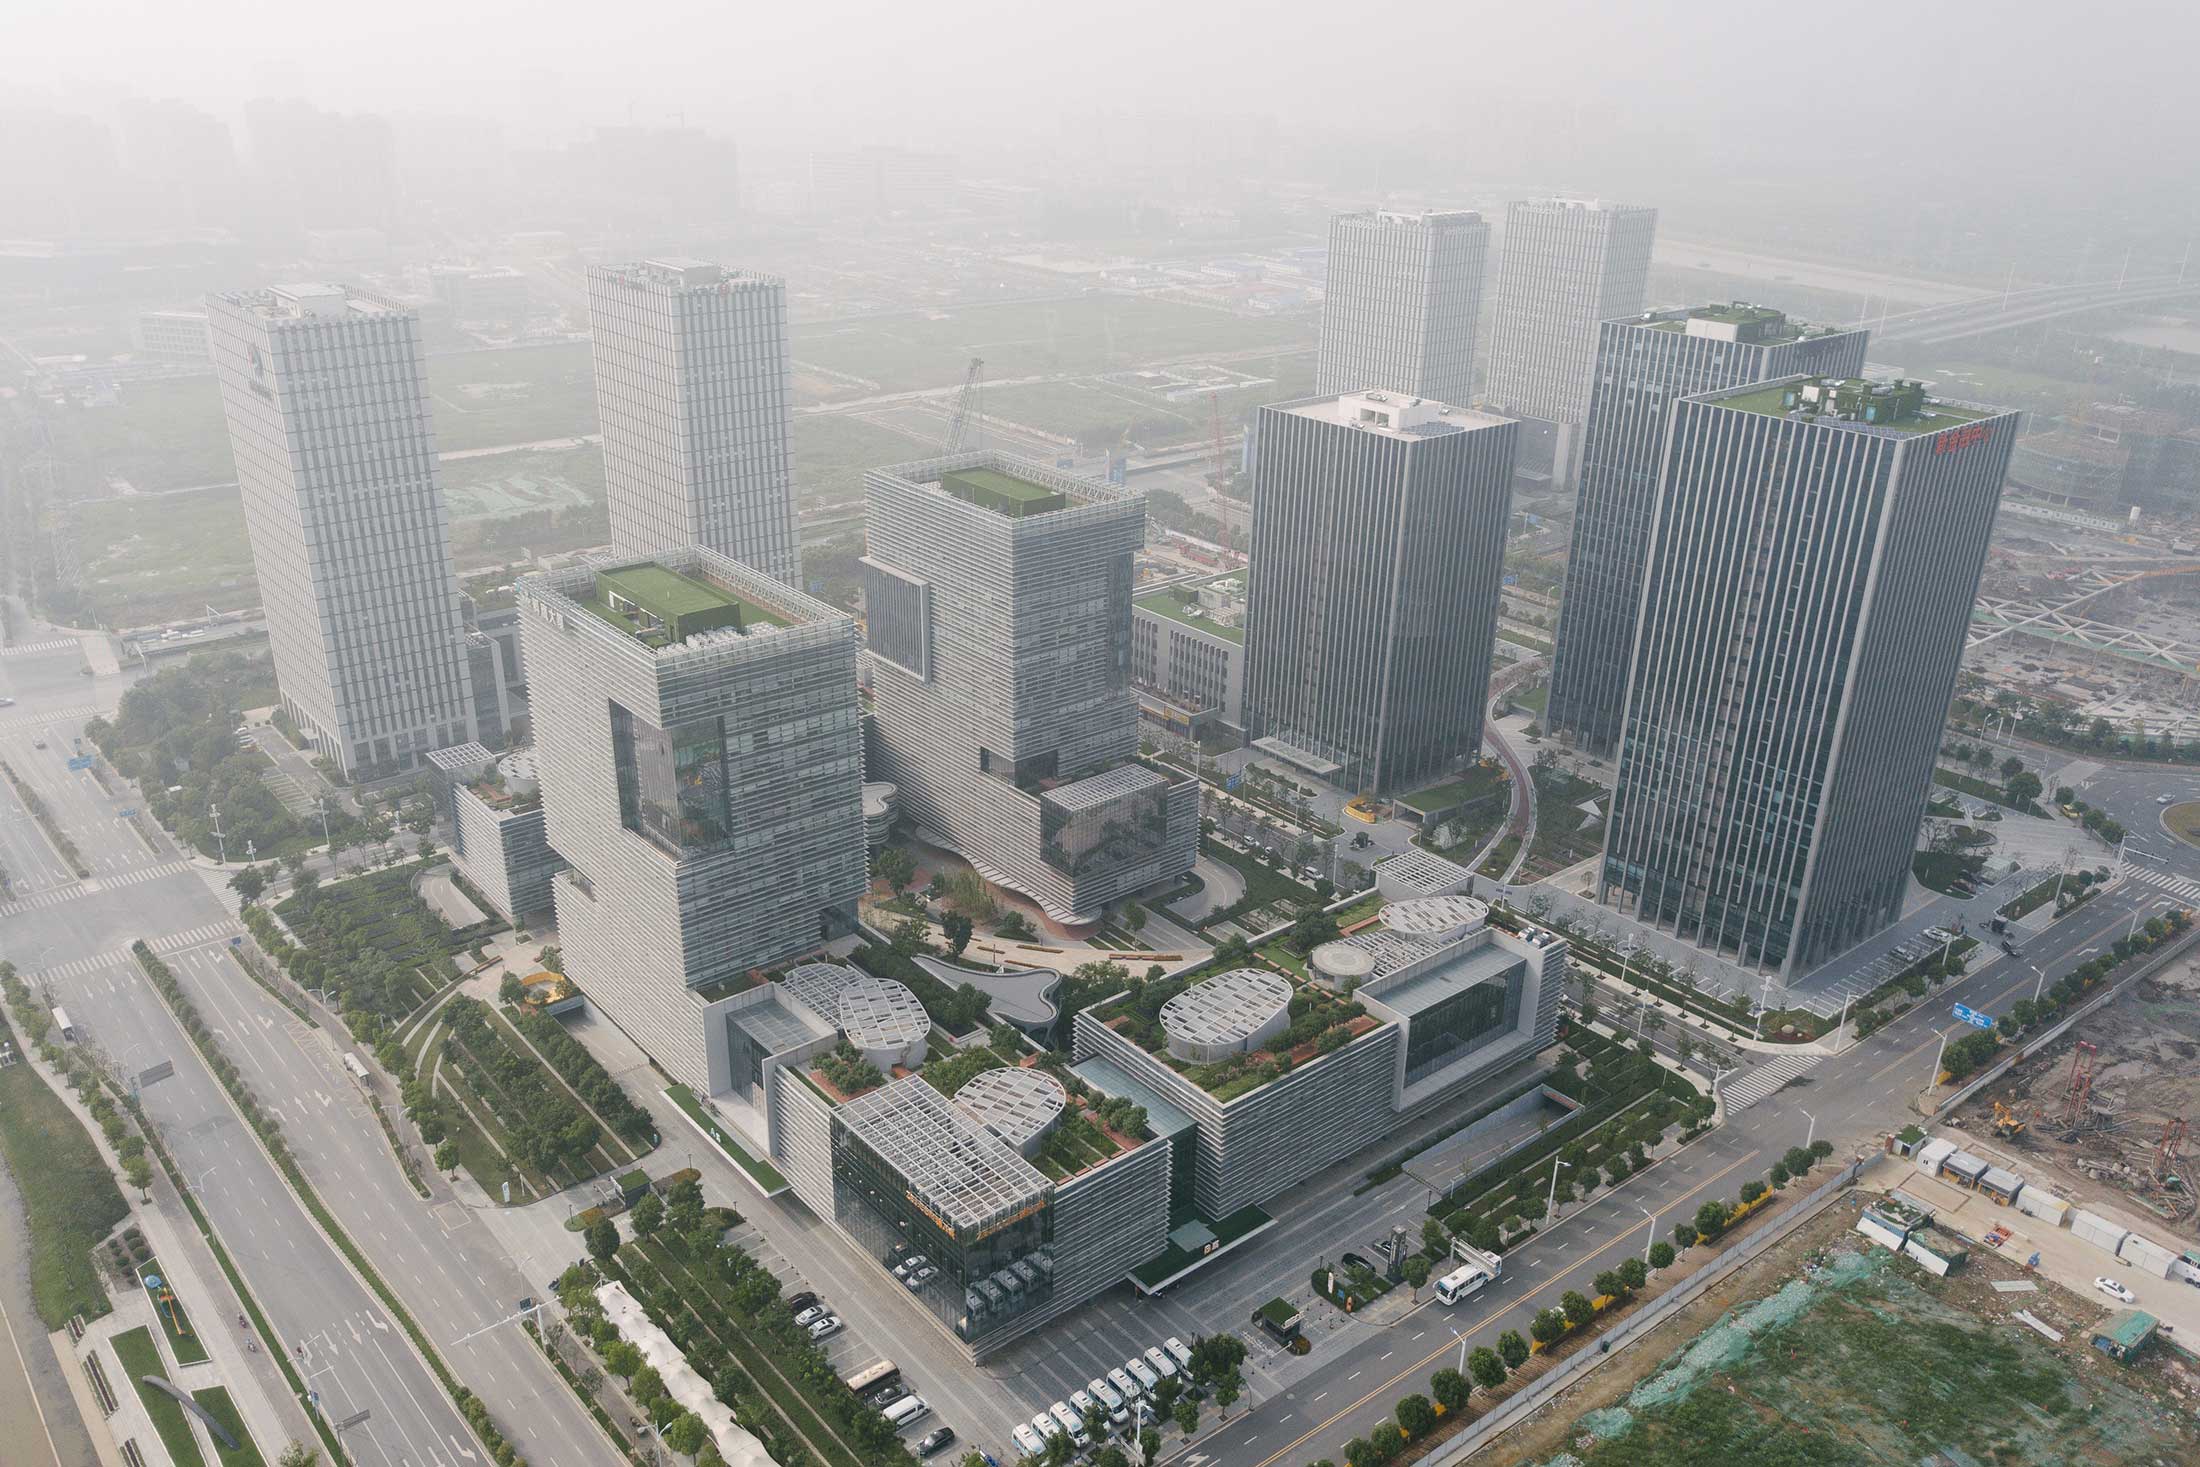 Nanjing, which was once China’s capital, is remaking itself as a tech hub.